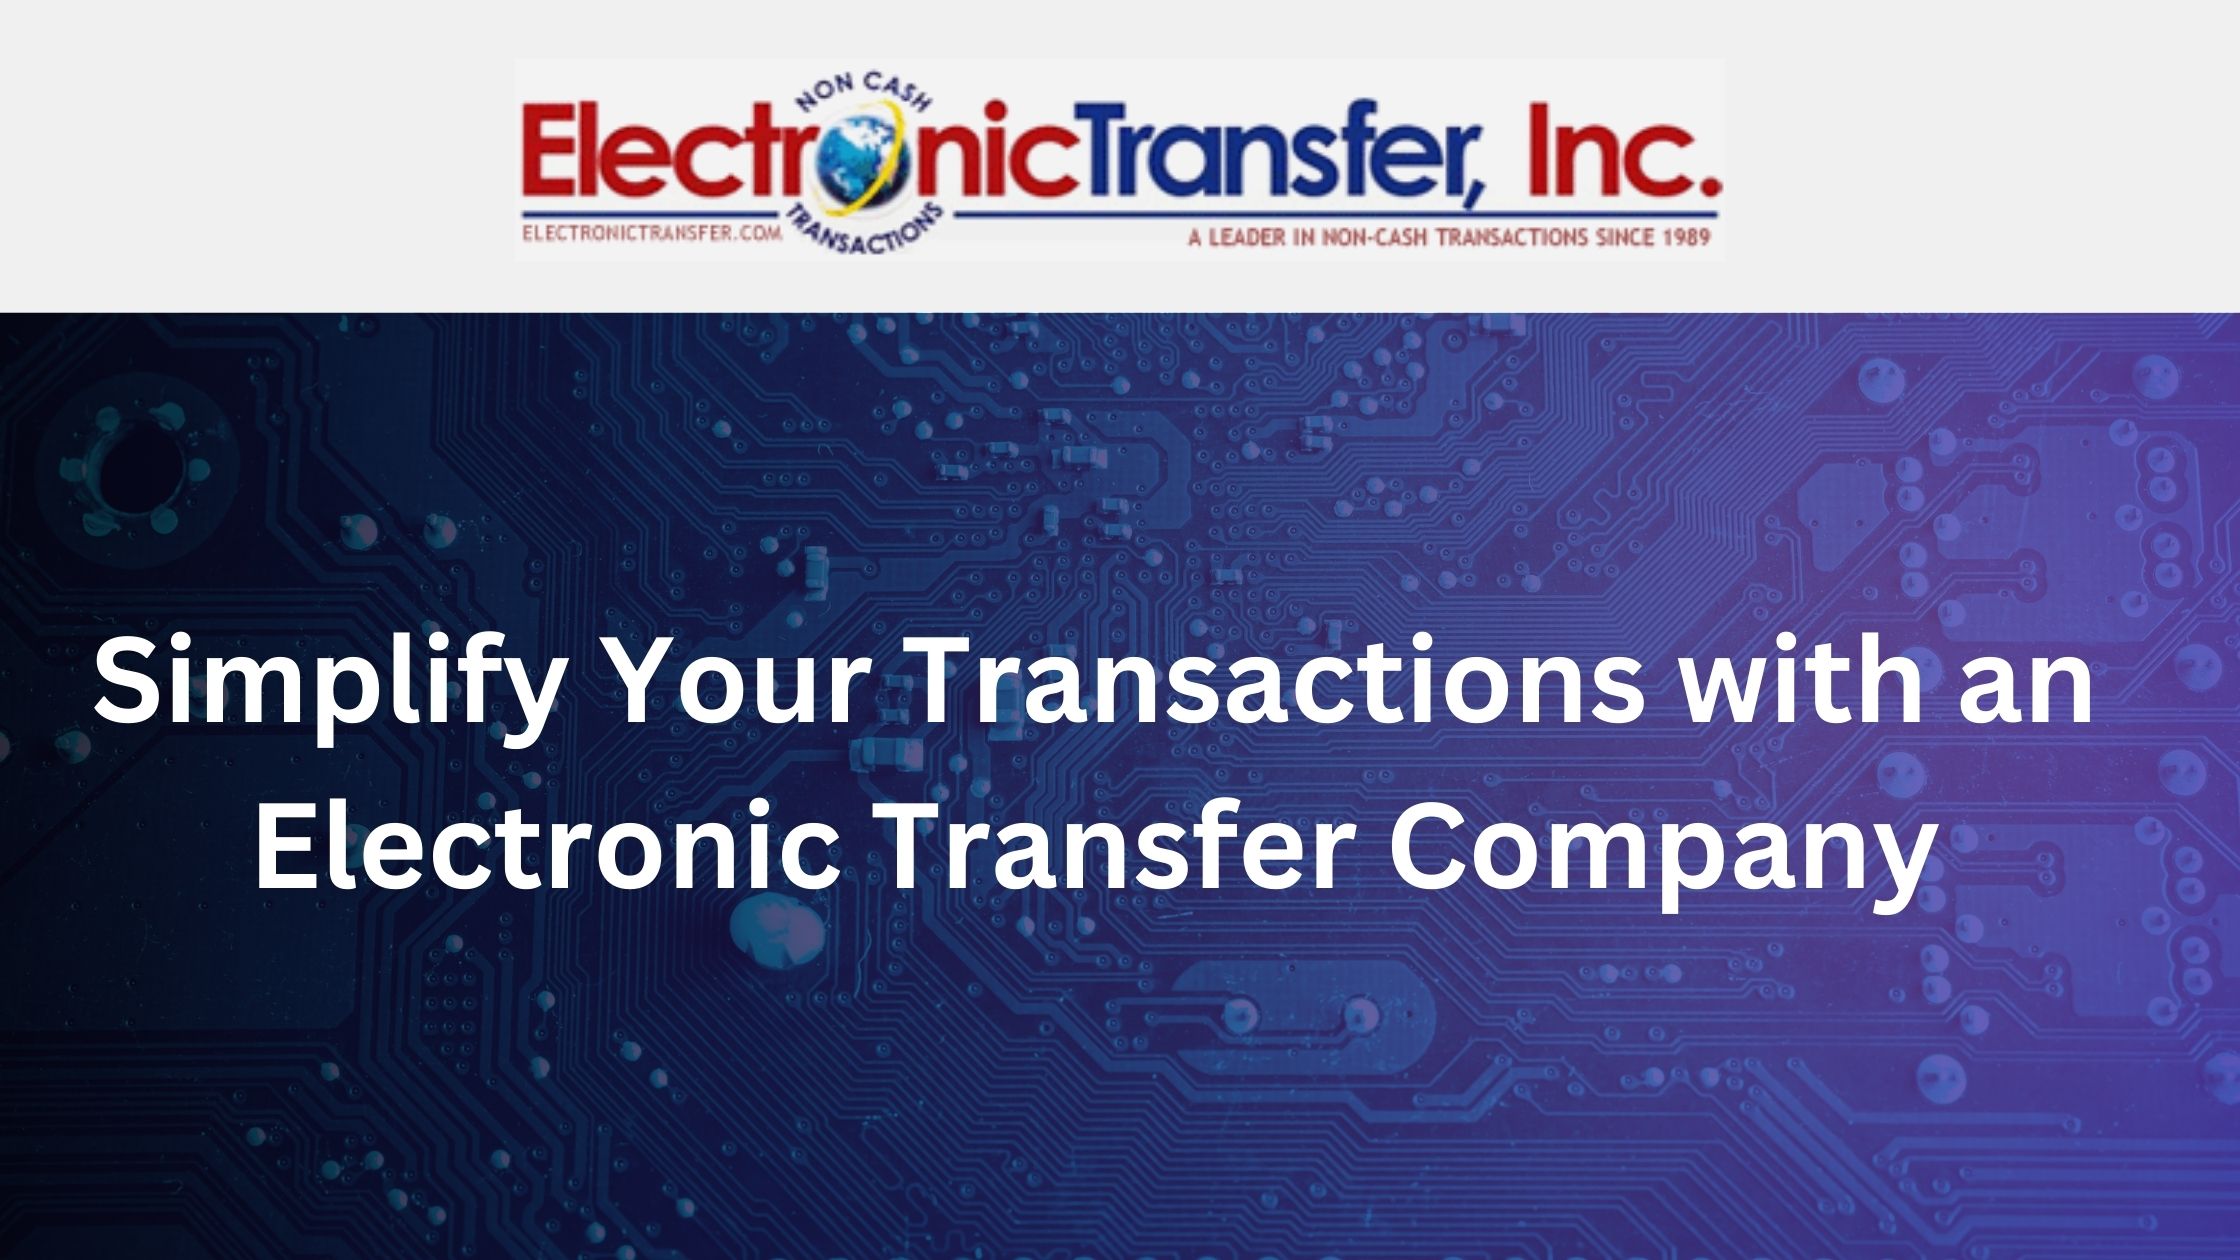 Simplify Your Transactions with an Electronic Transfer Company